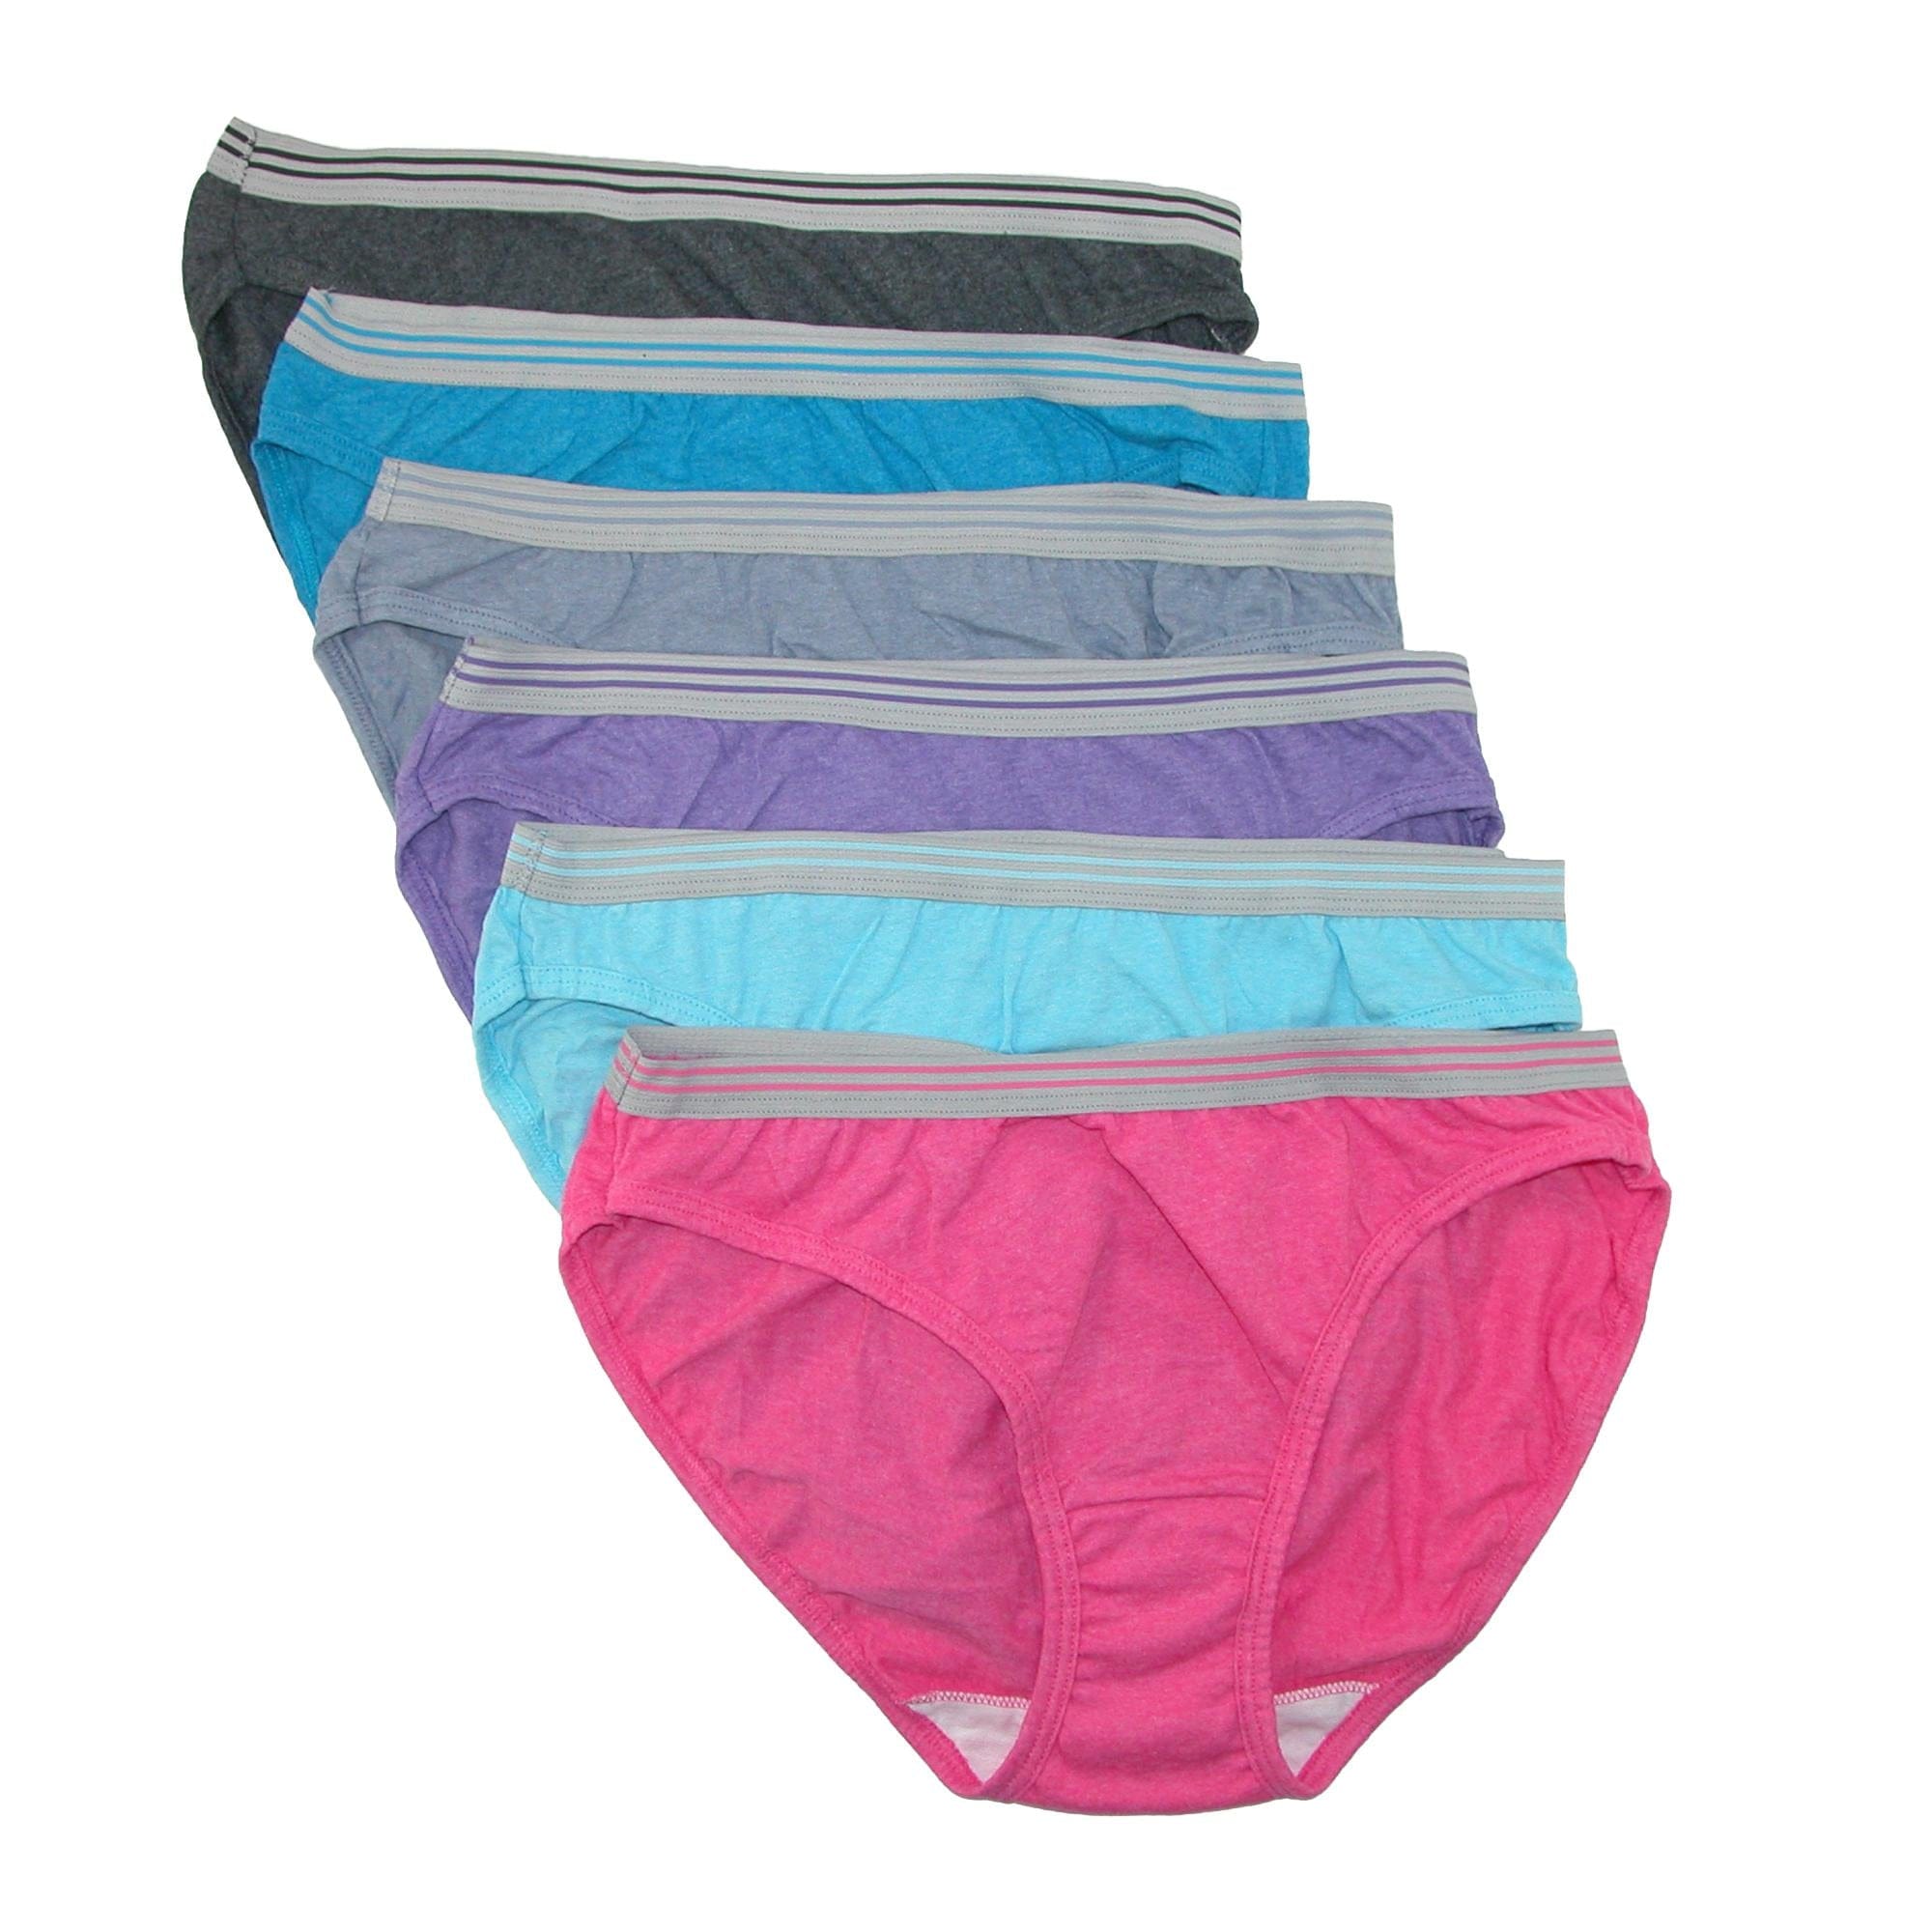 Fruit of the Loom Women's Comfort Covered Cotton Brief Underwear, 6-Pack